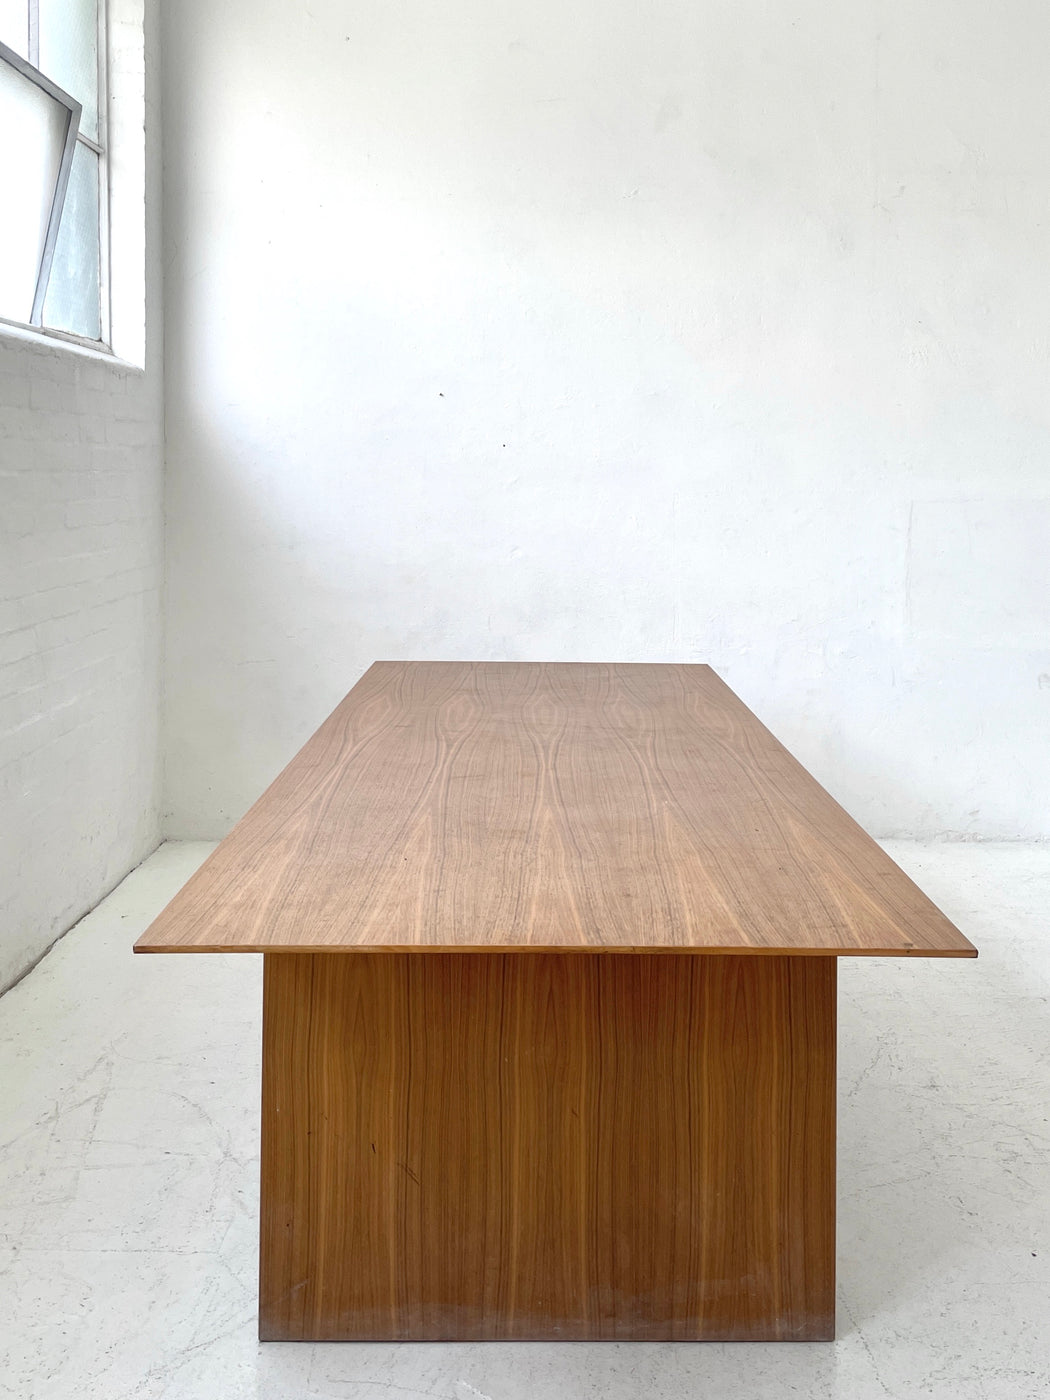 Large Walnut Dining Table